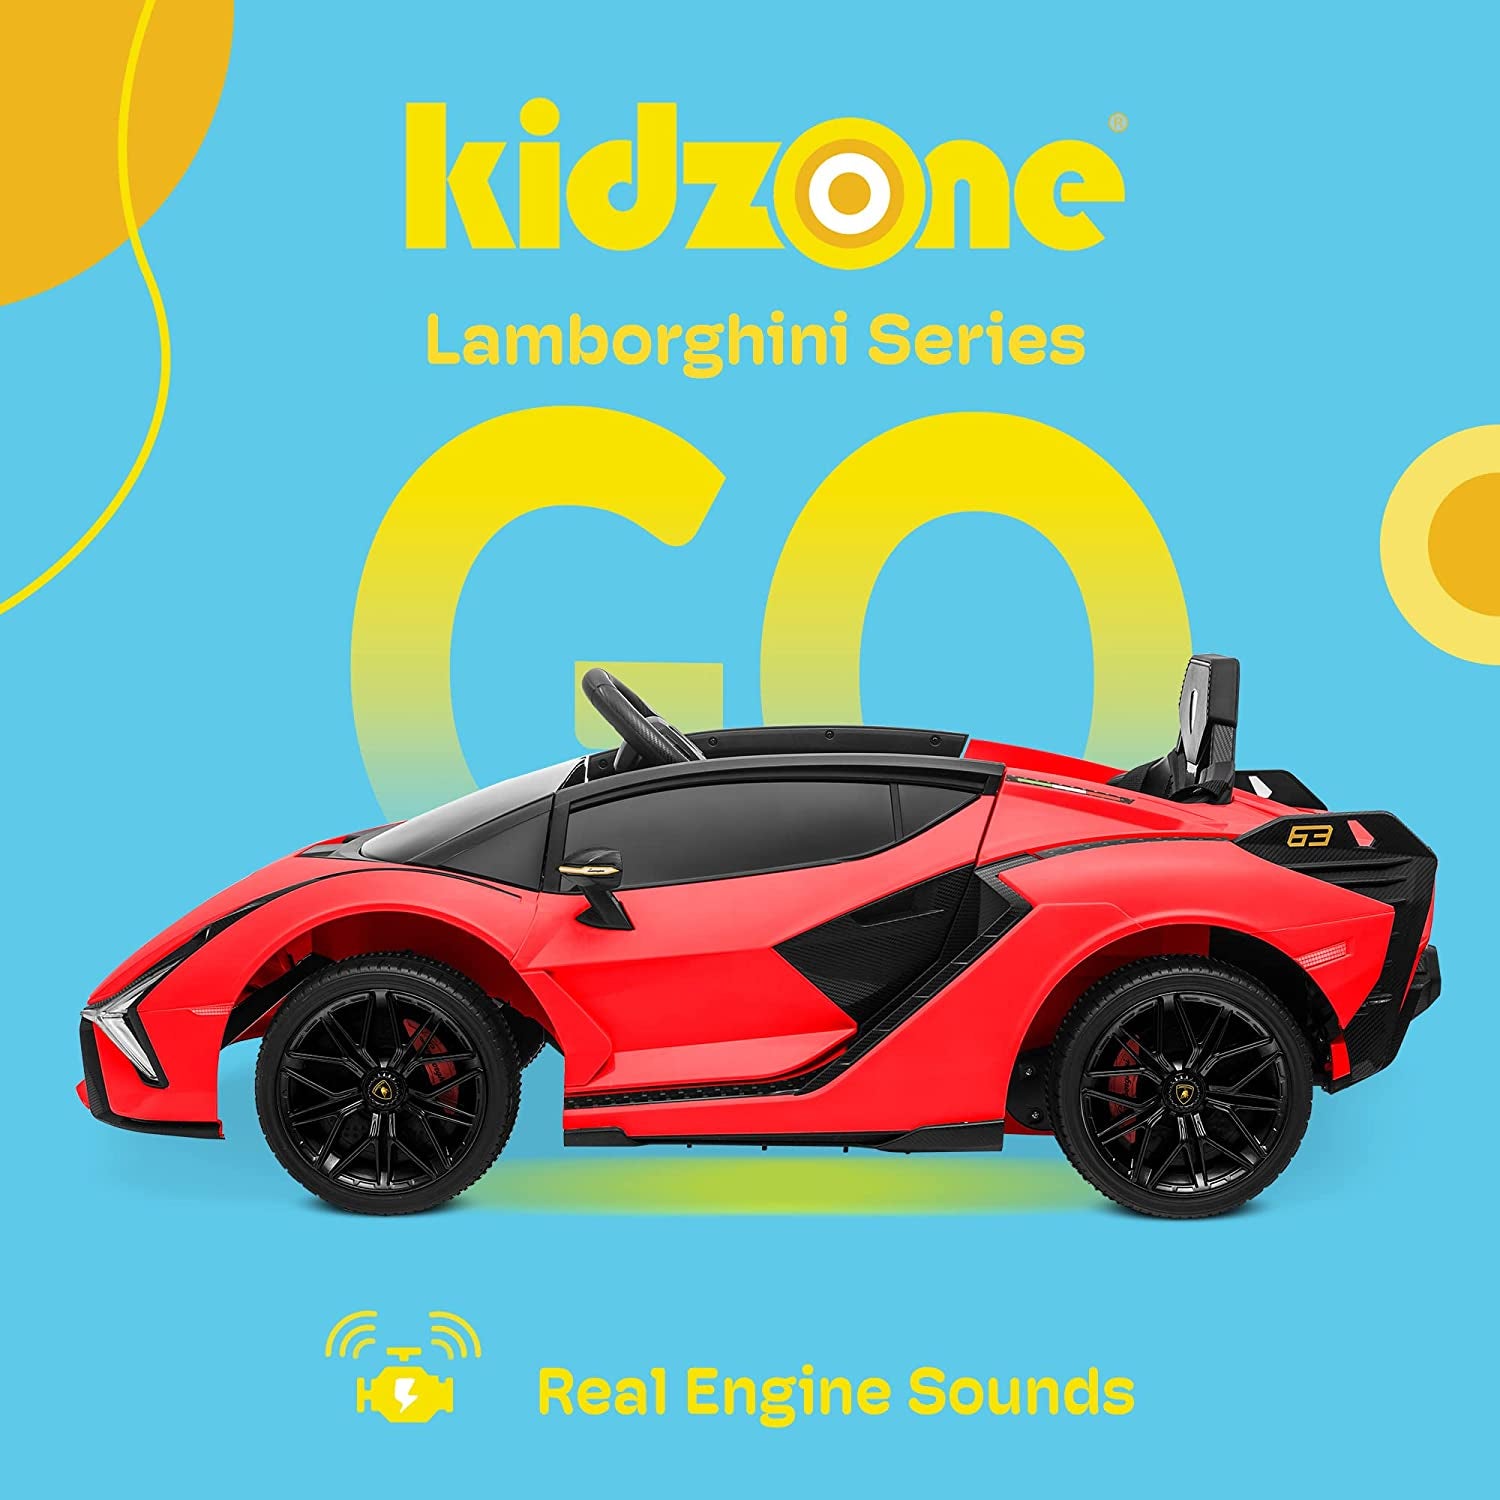 Kids Electric Ride on 12V Licensed Lamborghini Sian Roadster Battery Powered Sports Car Toy with 2 Speeds, Parent Control, Sound System, LED Headlights & Hydraulic Doors - Red